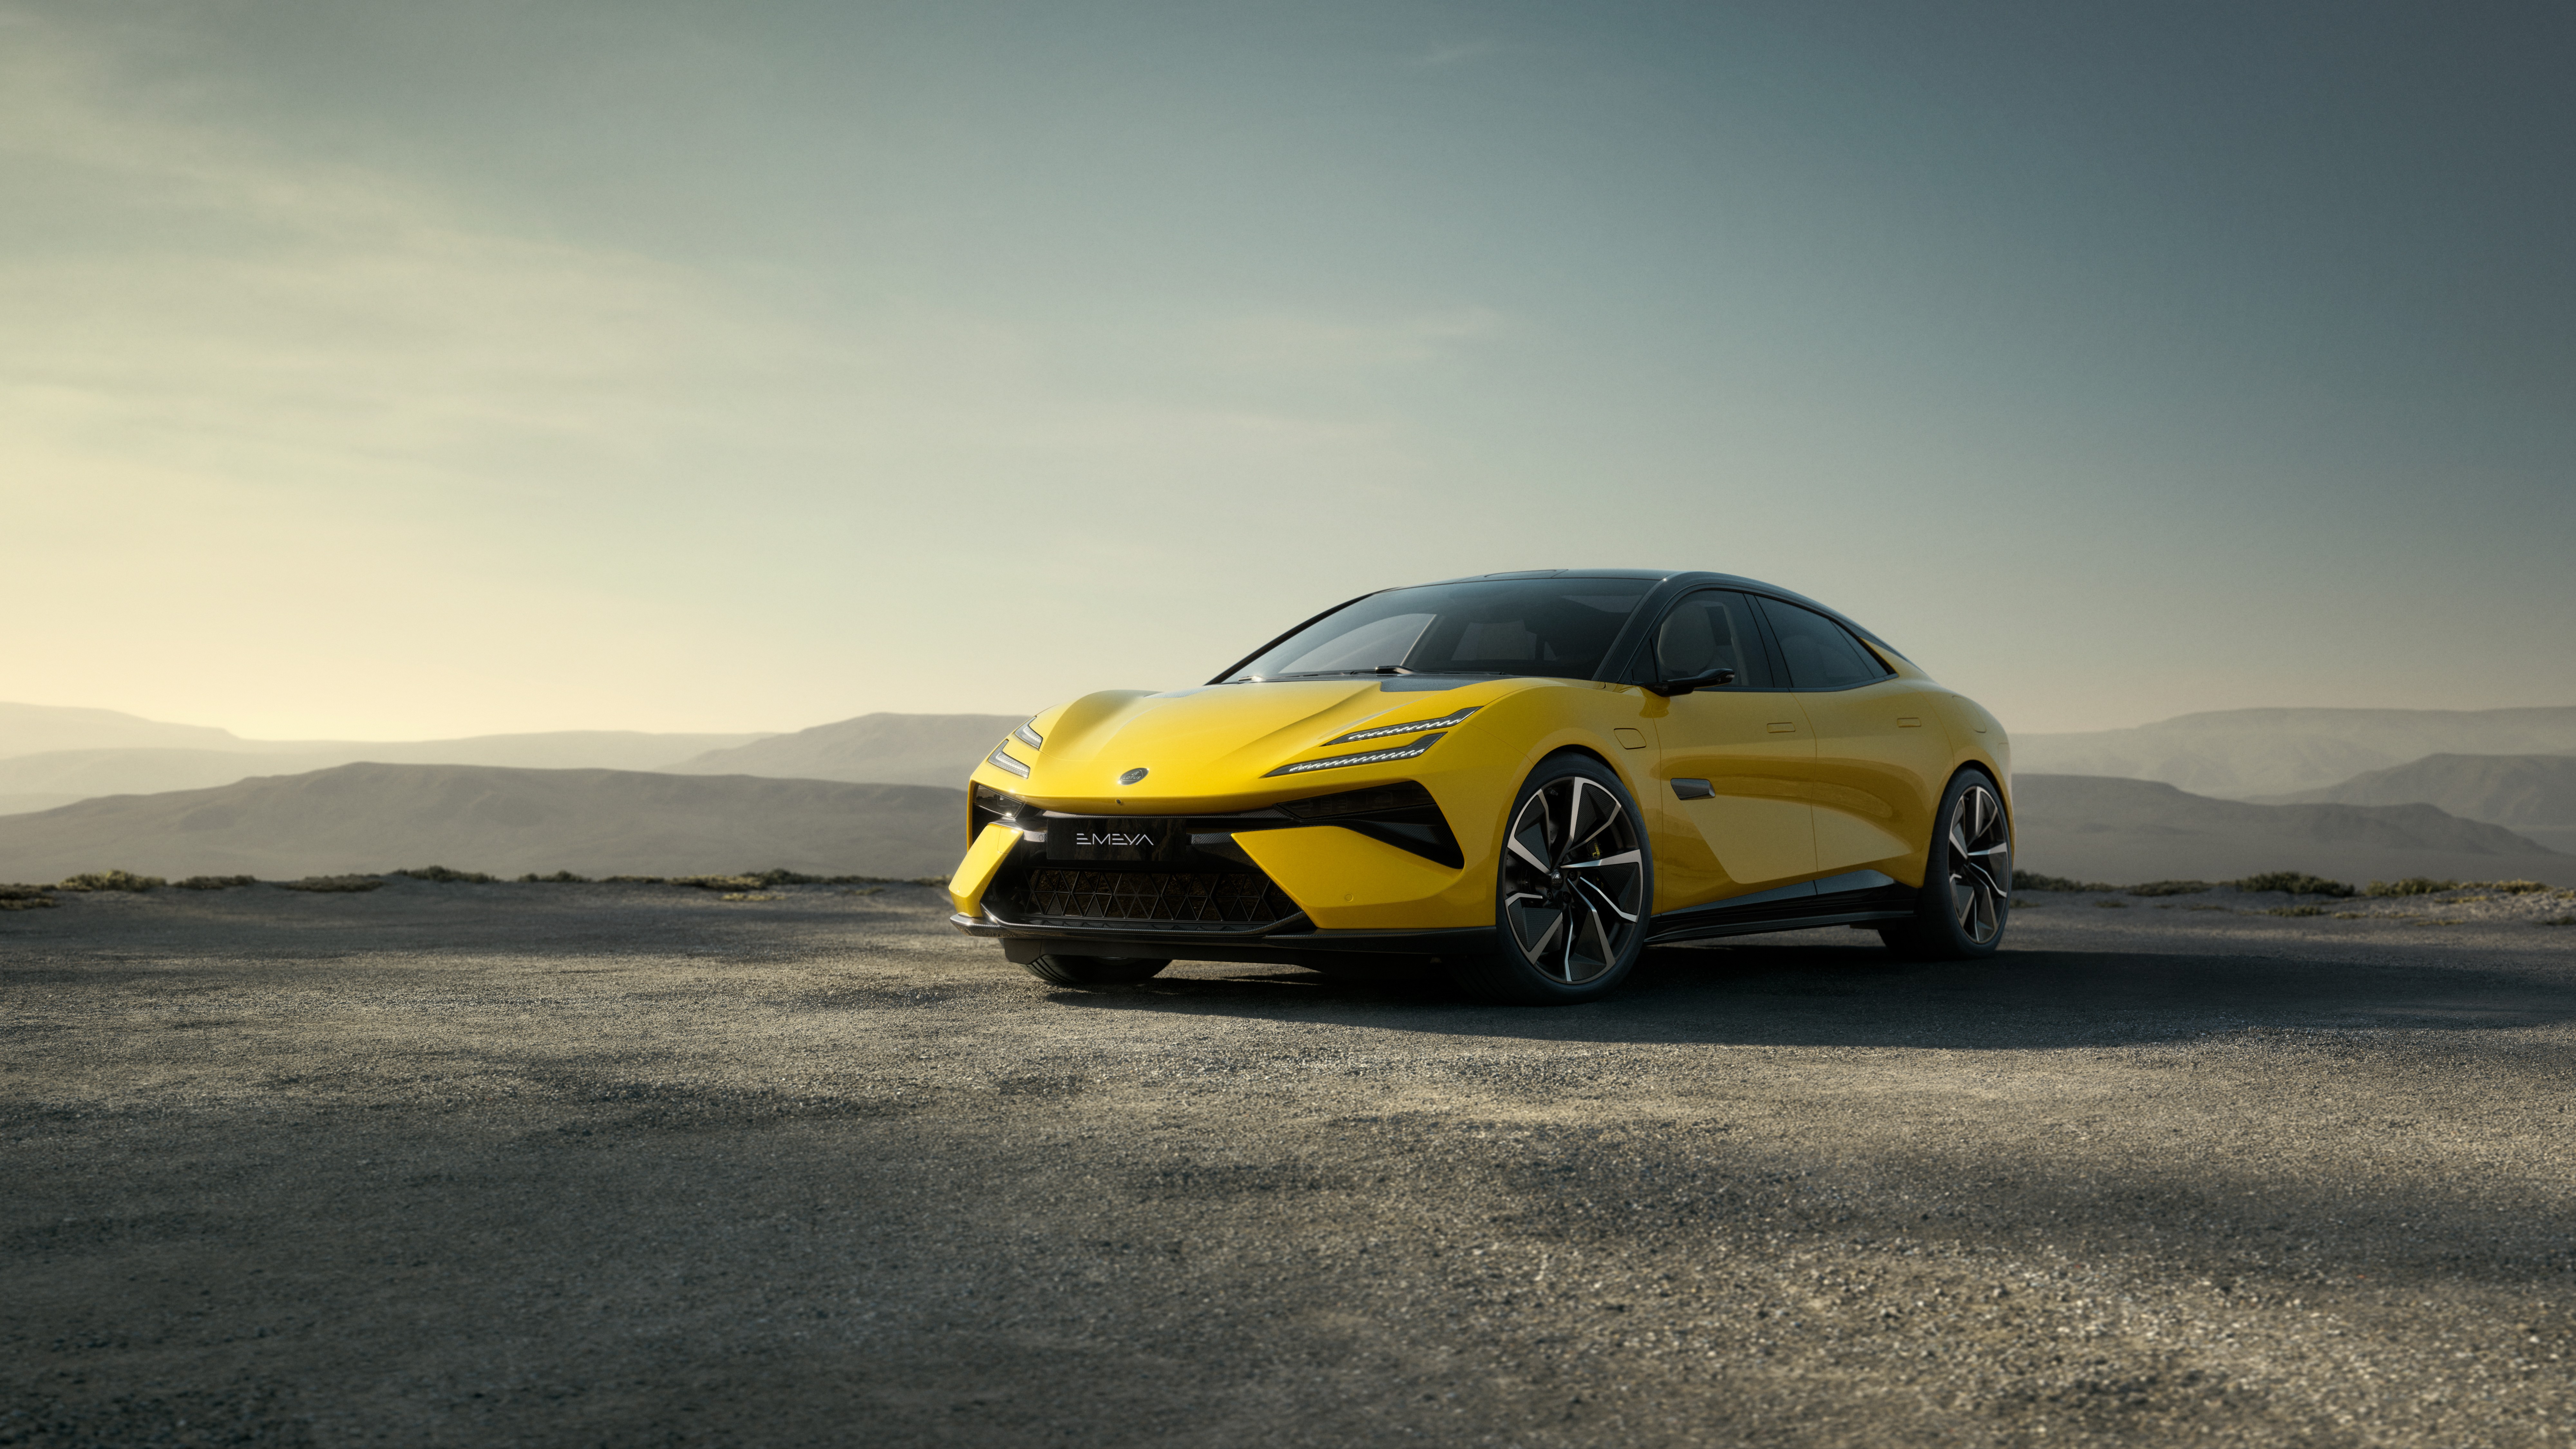 Lotus Technology to Go Public through Business Combination with L Catterton  Asia Acquisition Corp, Accelerating Lotus's Vision to Deliver All-Electric,  Sustainable Luxury Vehicles Globally